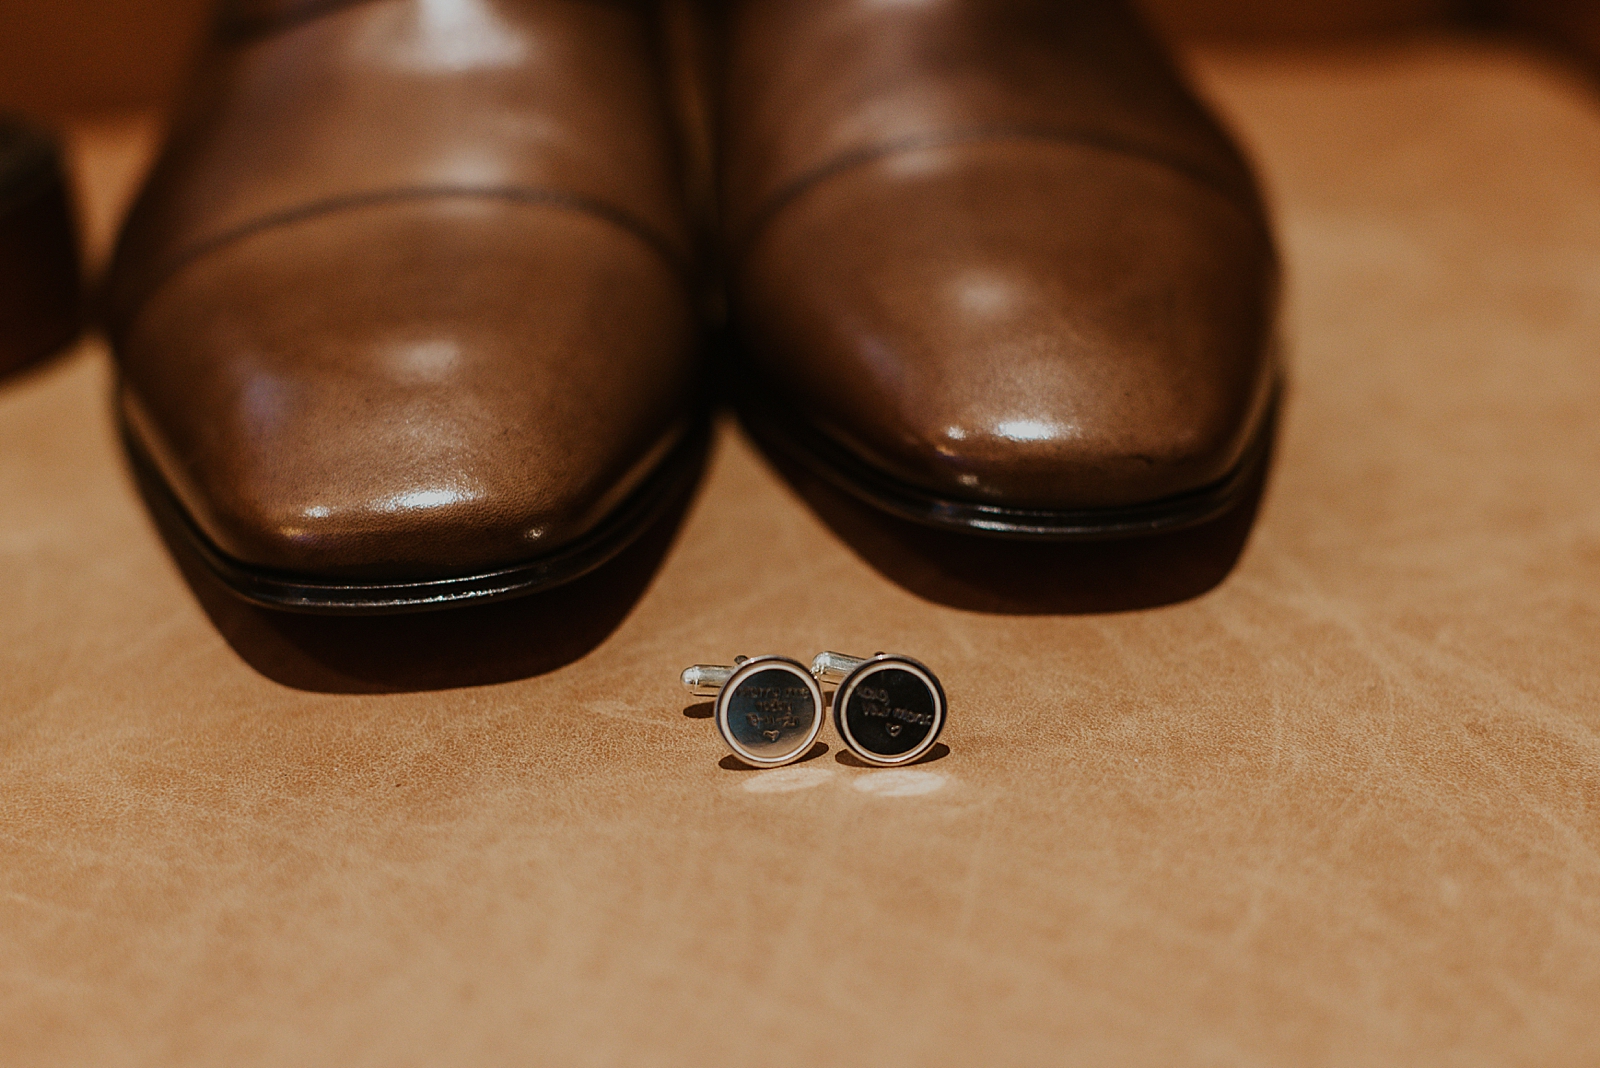 Detail shot oif cuff locks and Groom's shoes